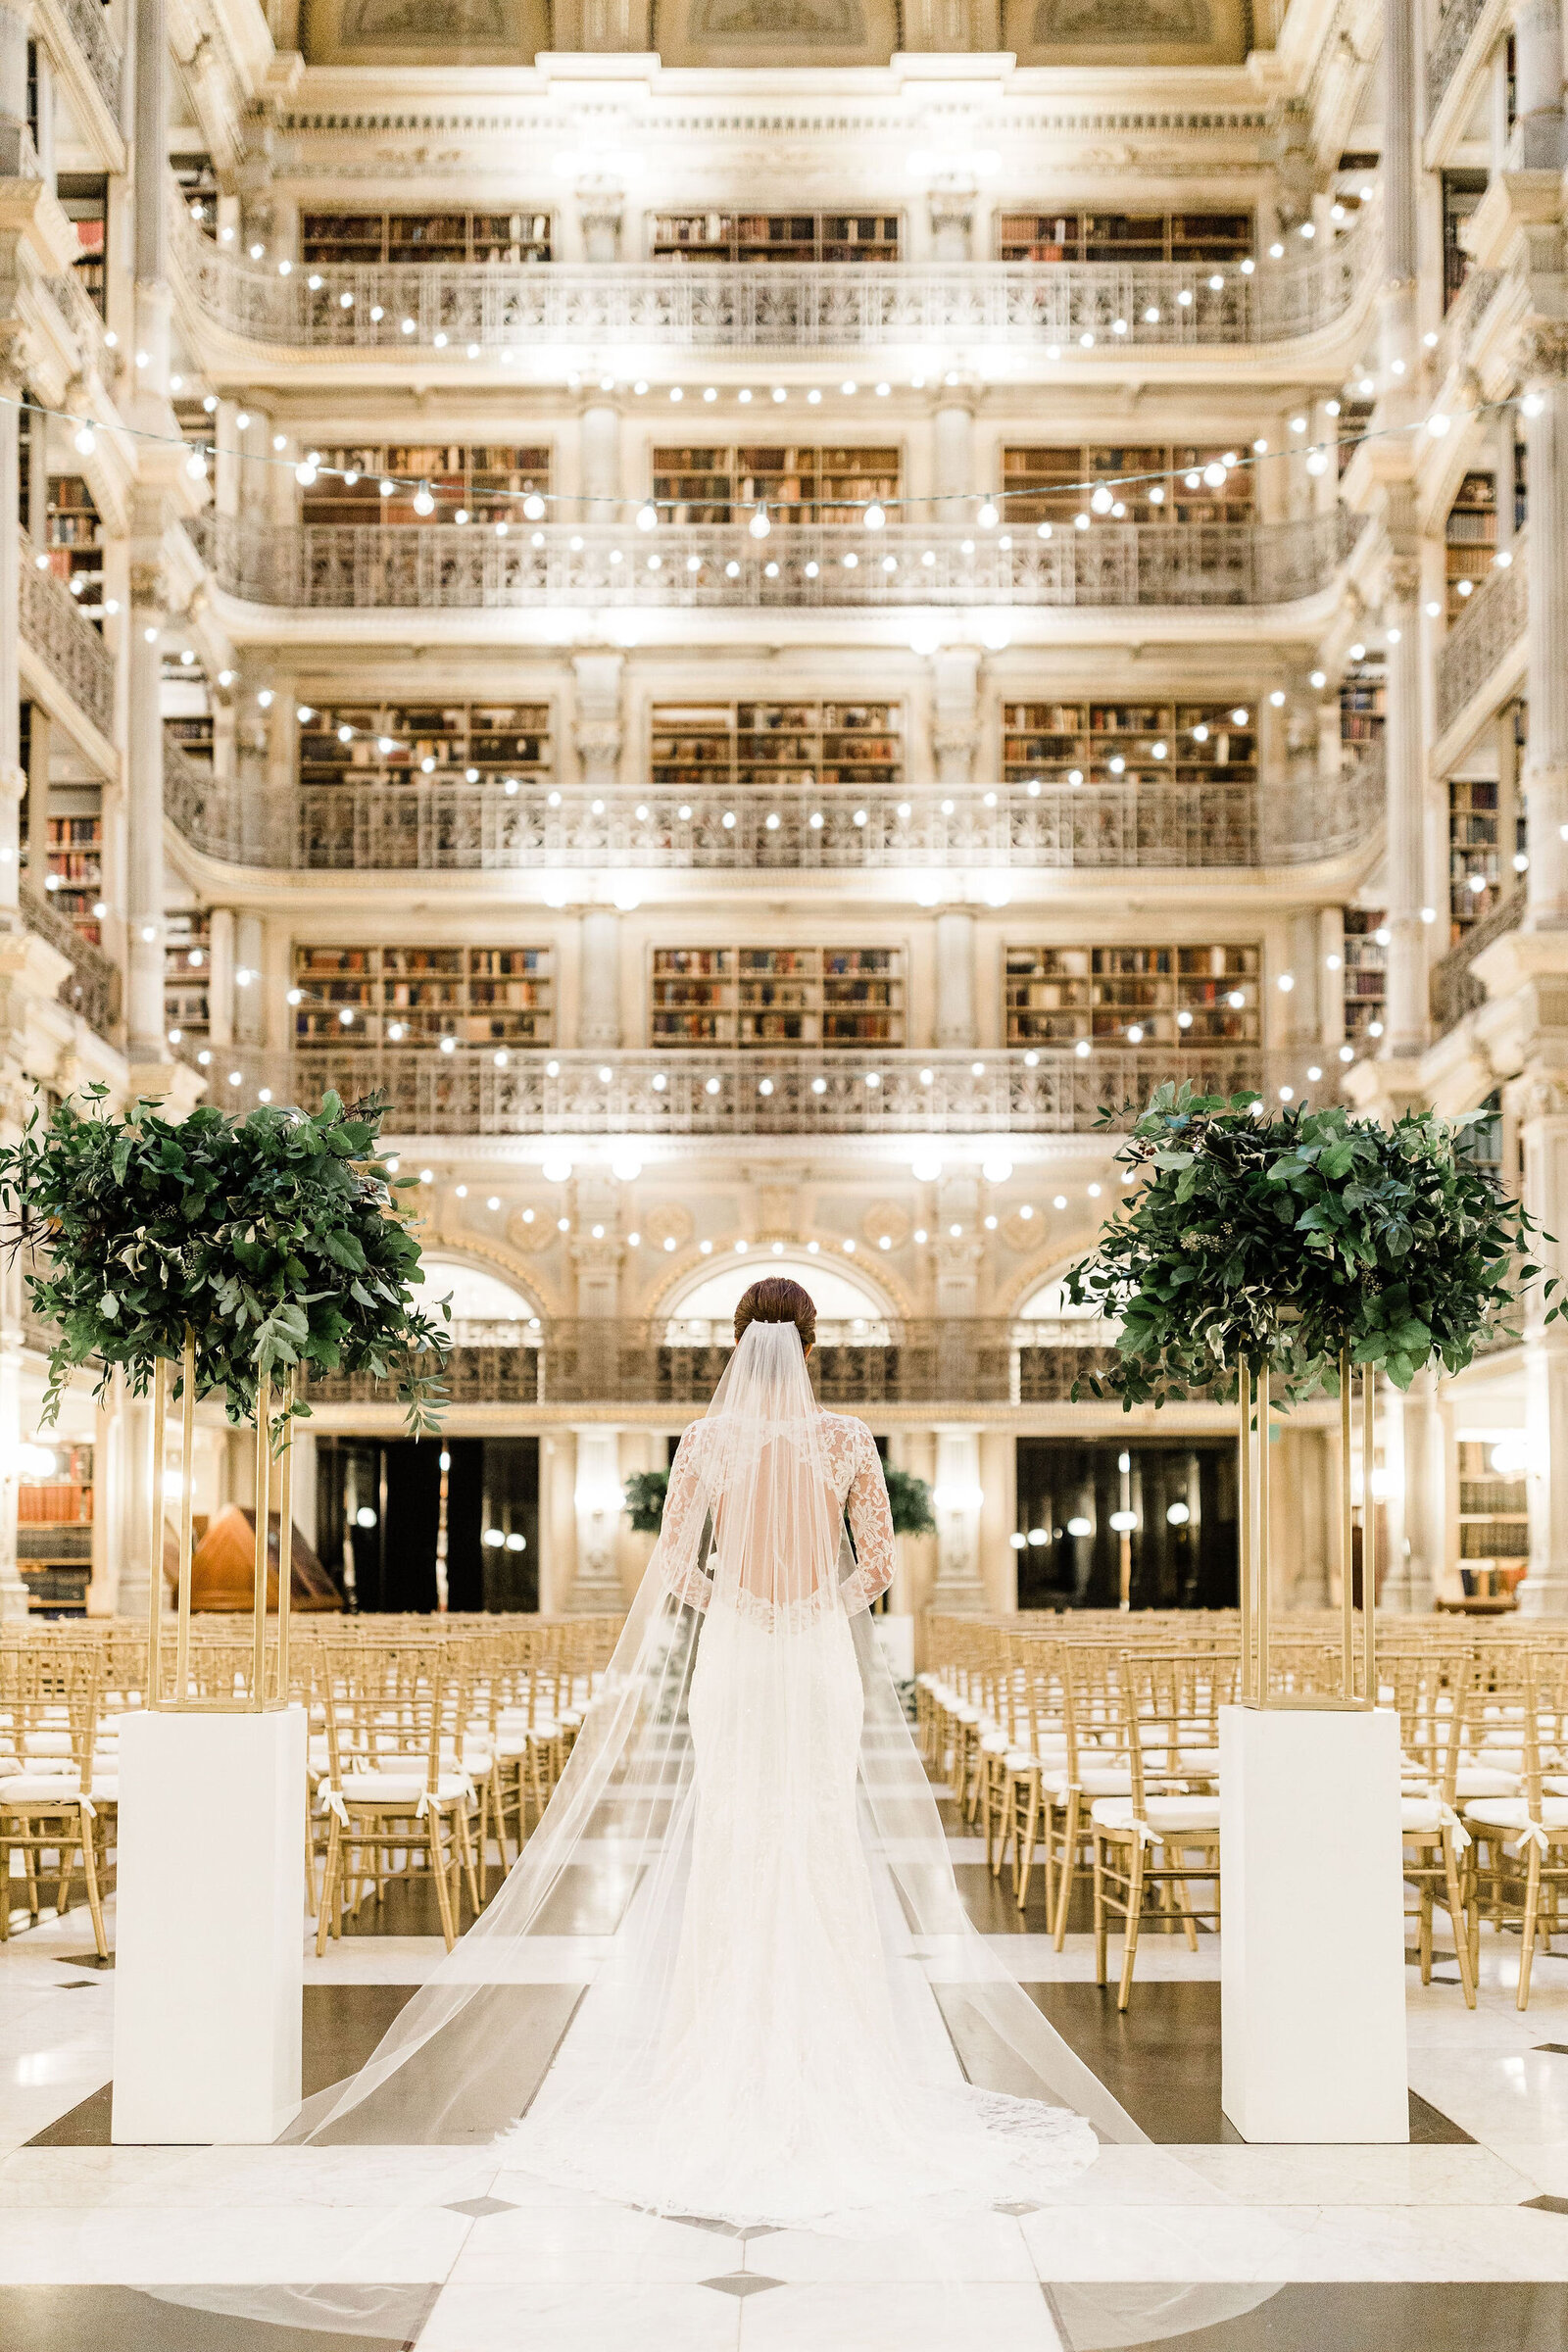 Stunning Bridal photos | The Peabody Library Baltimore MD | The Axtells Photo and Film